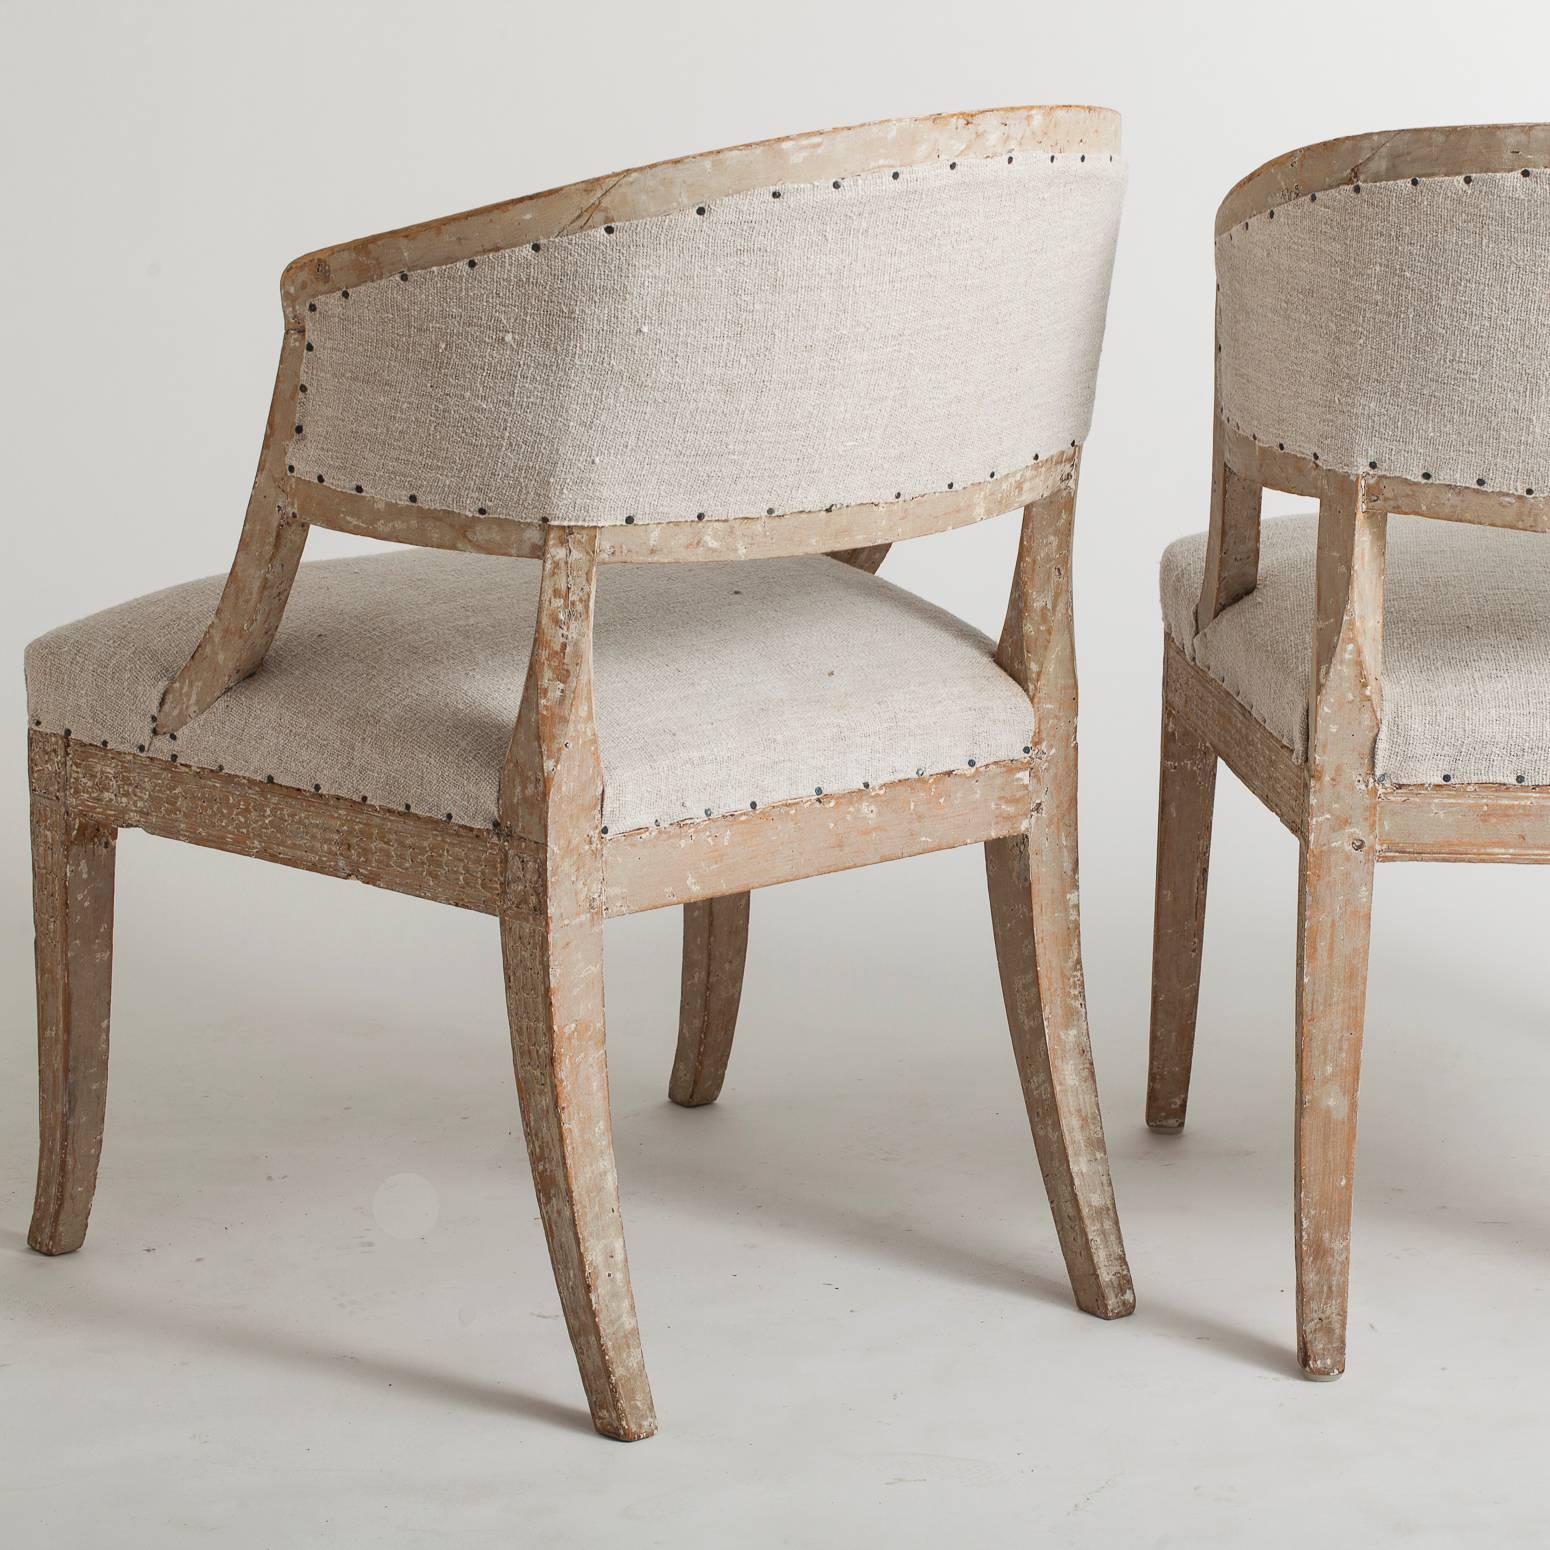 This pair of barrel back chairs have many elements that make them truly unusual. The pale paint surface is original and delicate carving on the back and legs are beautifully executed. A subtle woman's face carved at the end of arm is very special